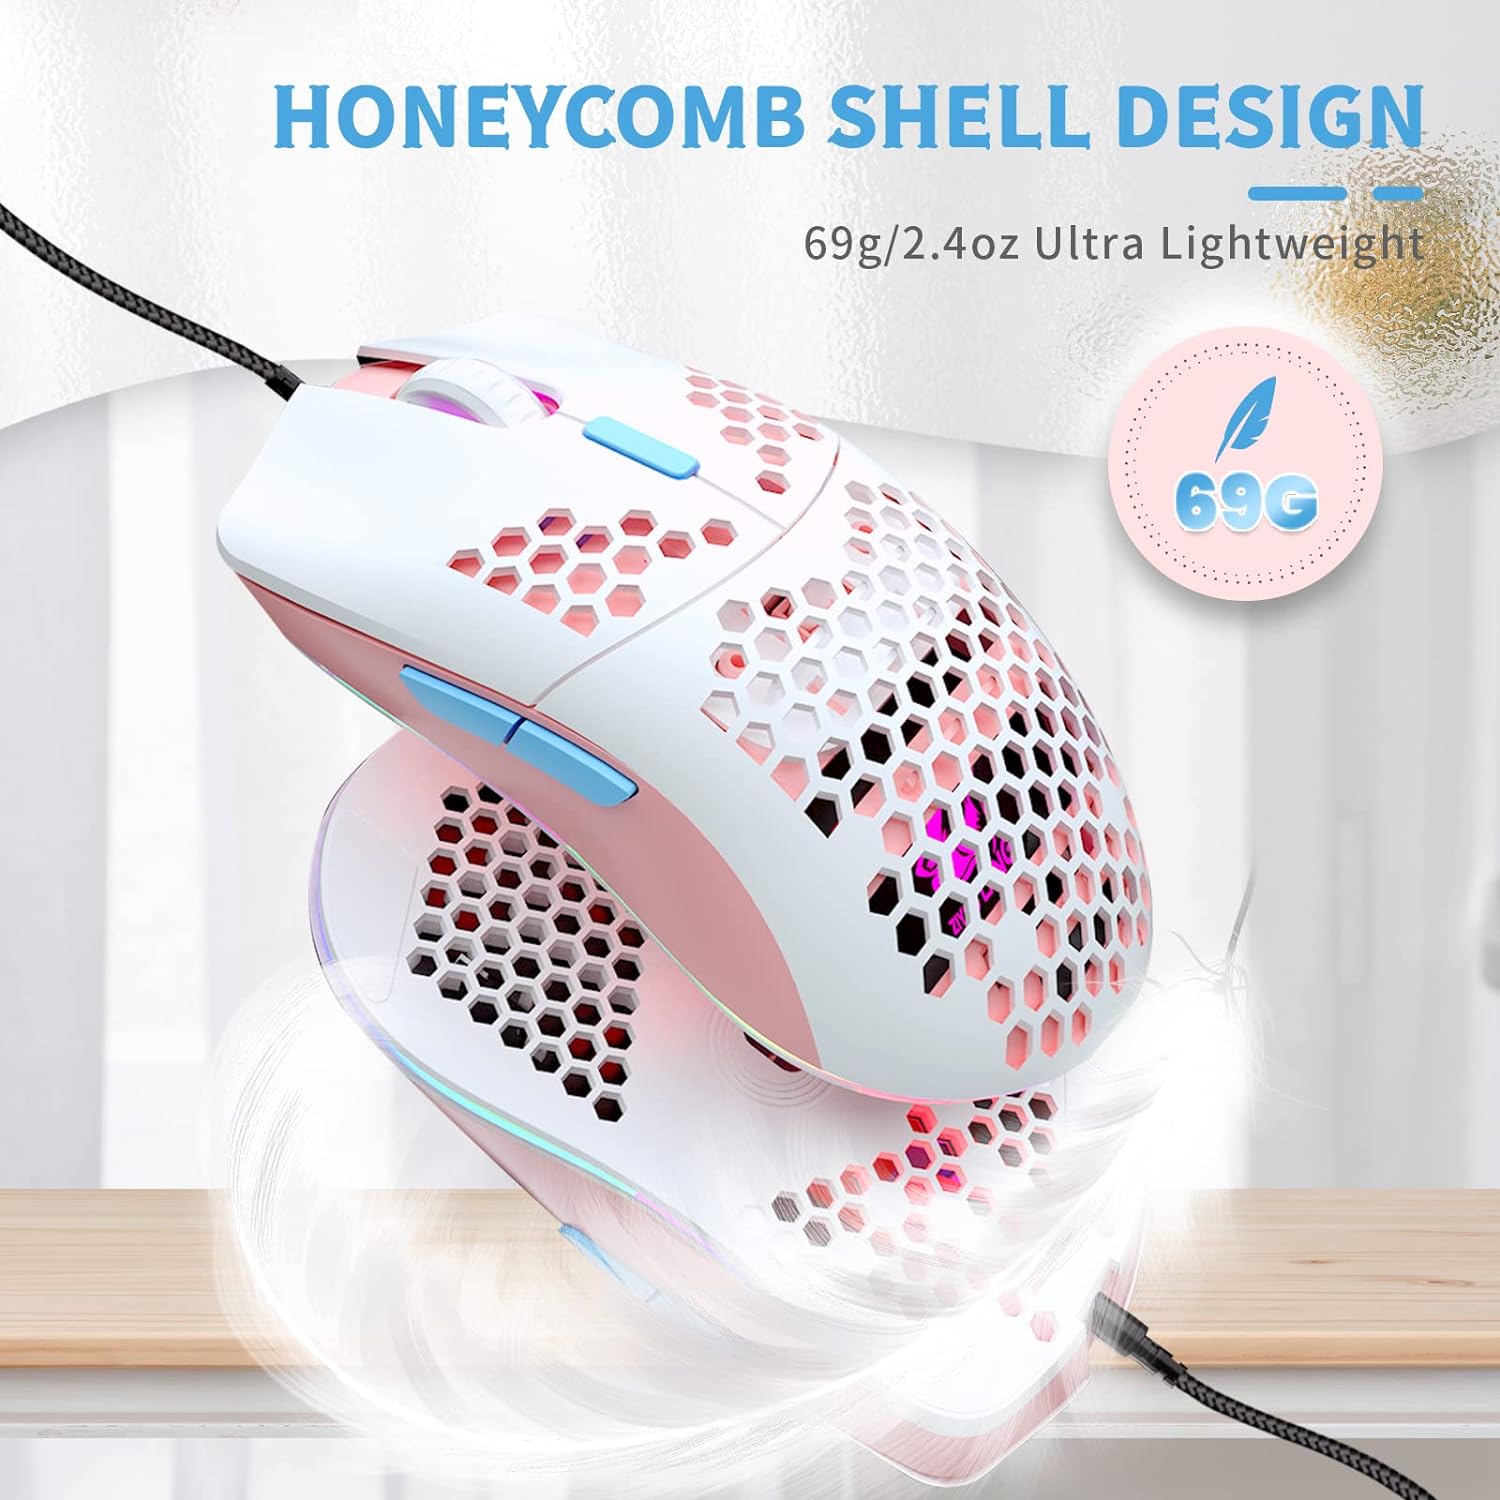 Wired Honeycomb Lightweight Multicolor Gaming Mouse 69g Ultralight RGB Backlit